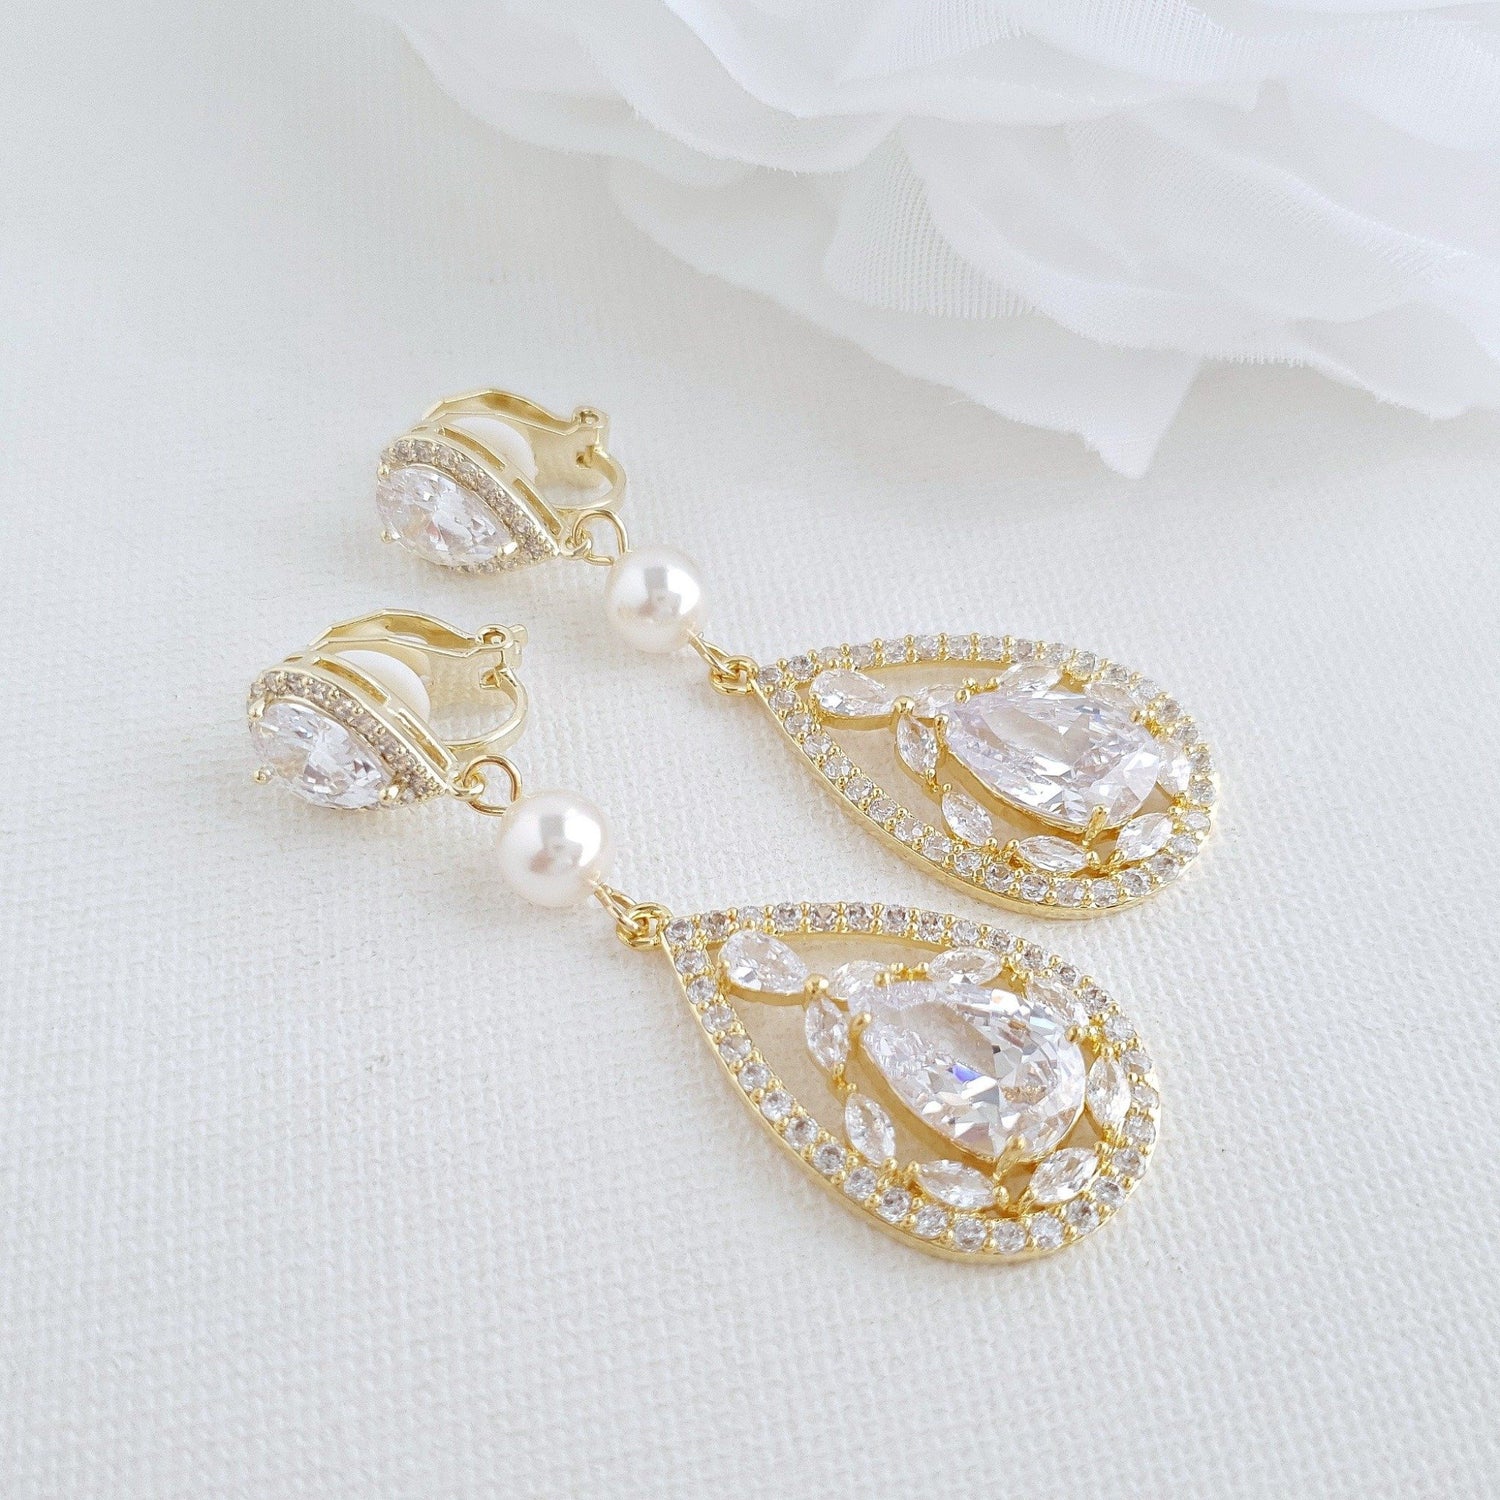 Yellow Gold Clip On Earrings Made of Cubic zirconia for Brides and Weddings- Poetry Designs